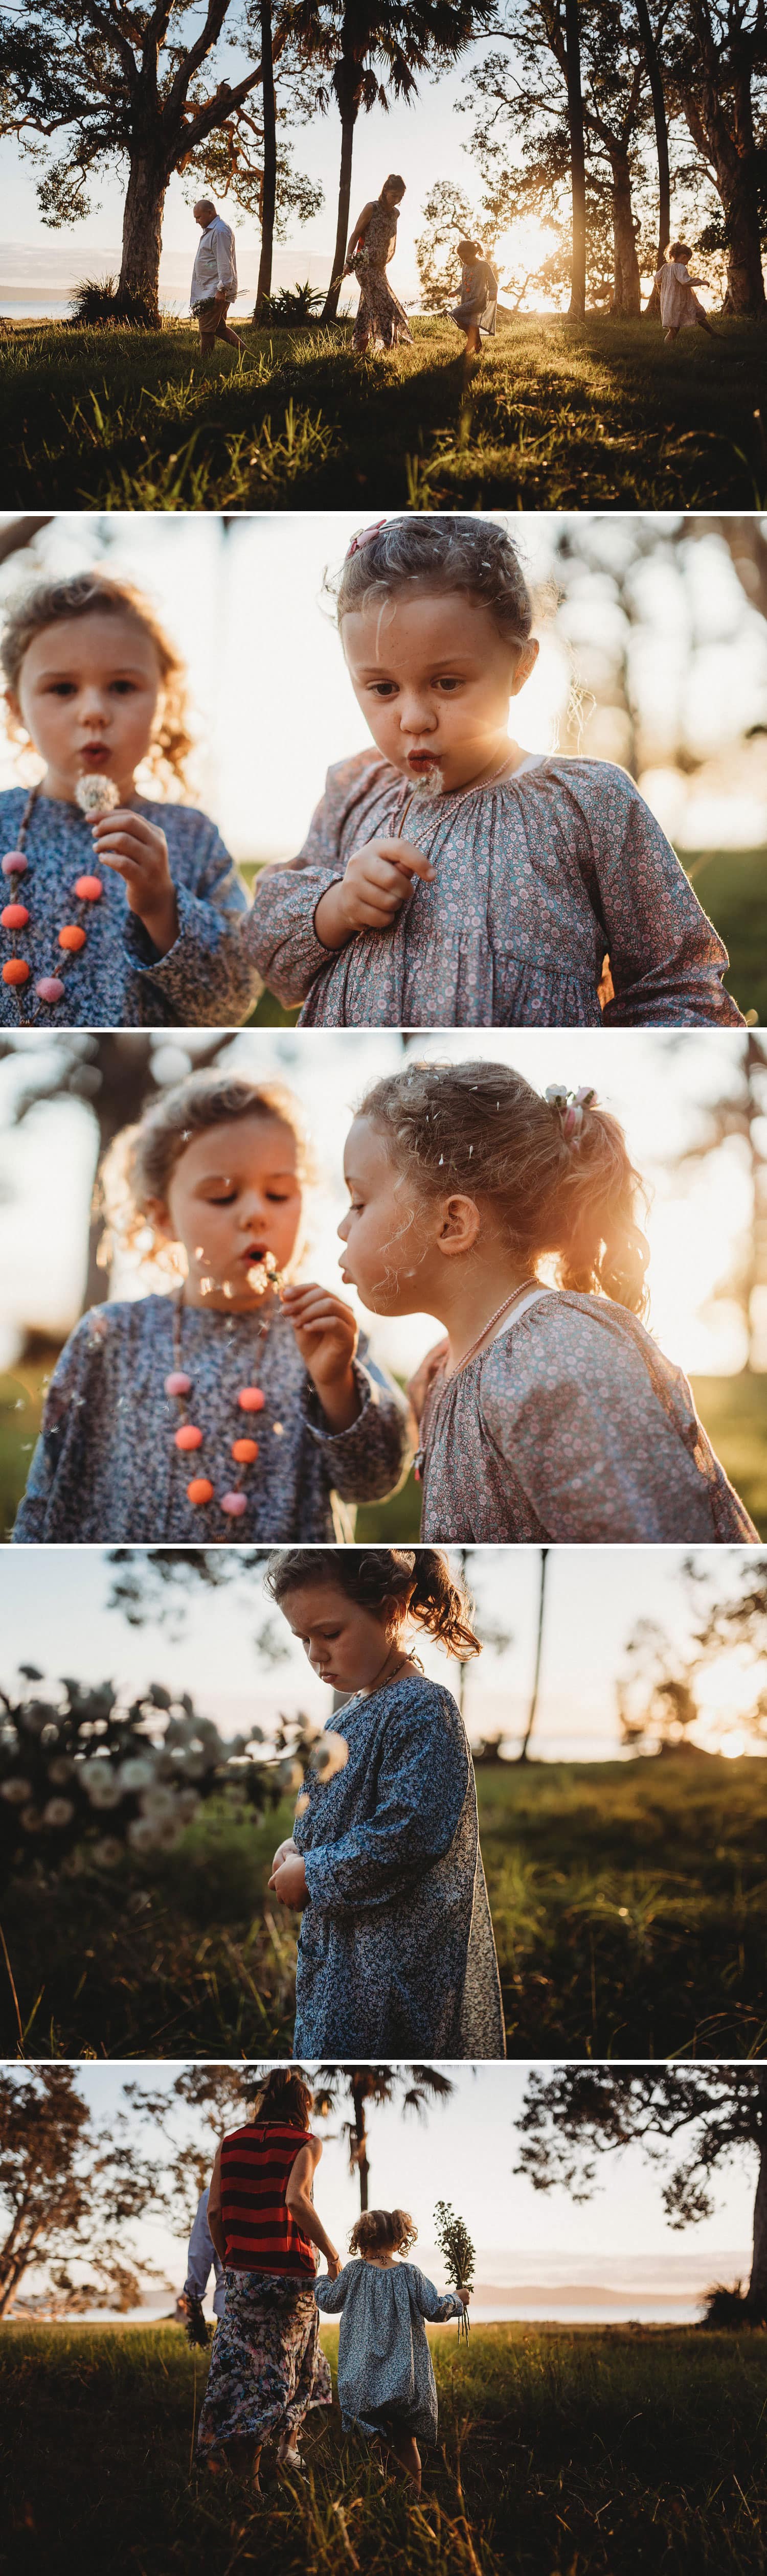 all-natural-family-photography-shoot-sydney